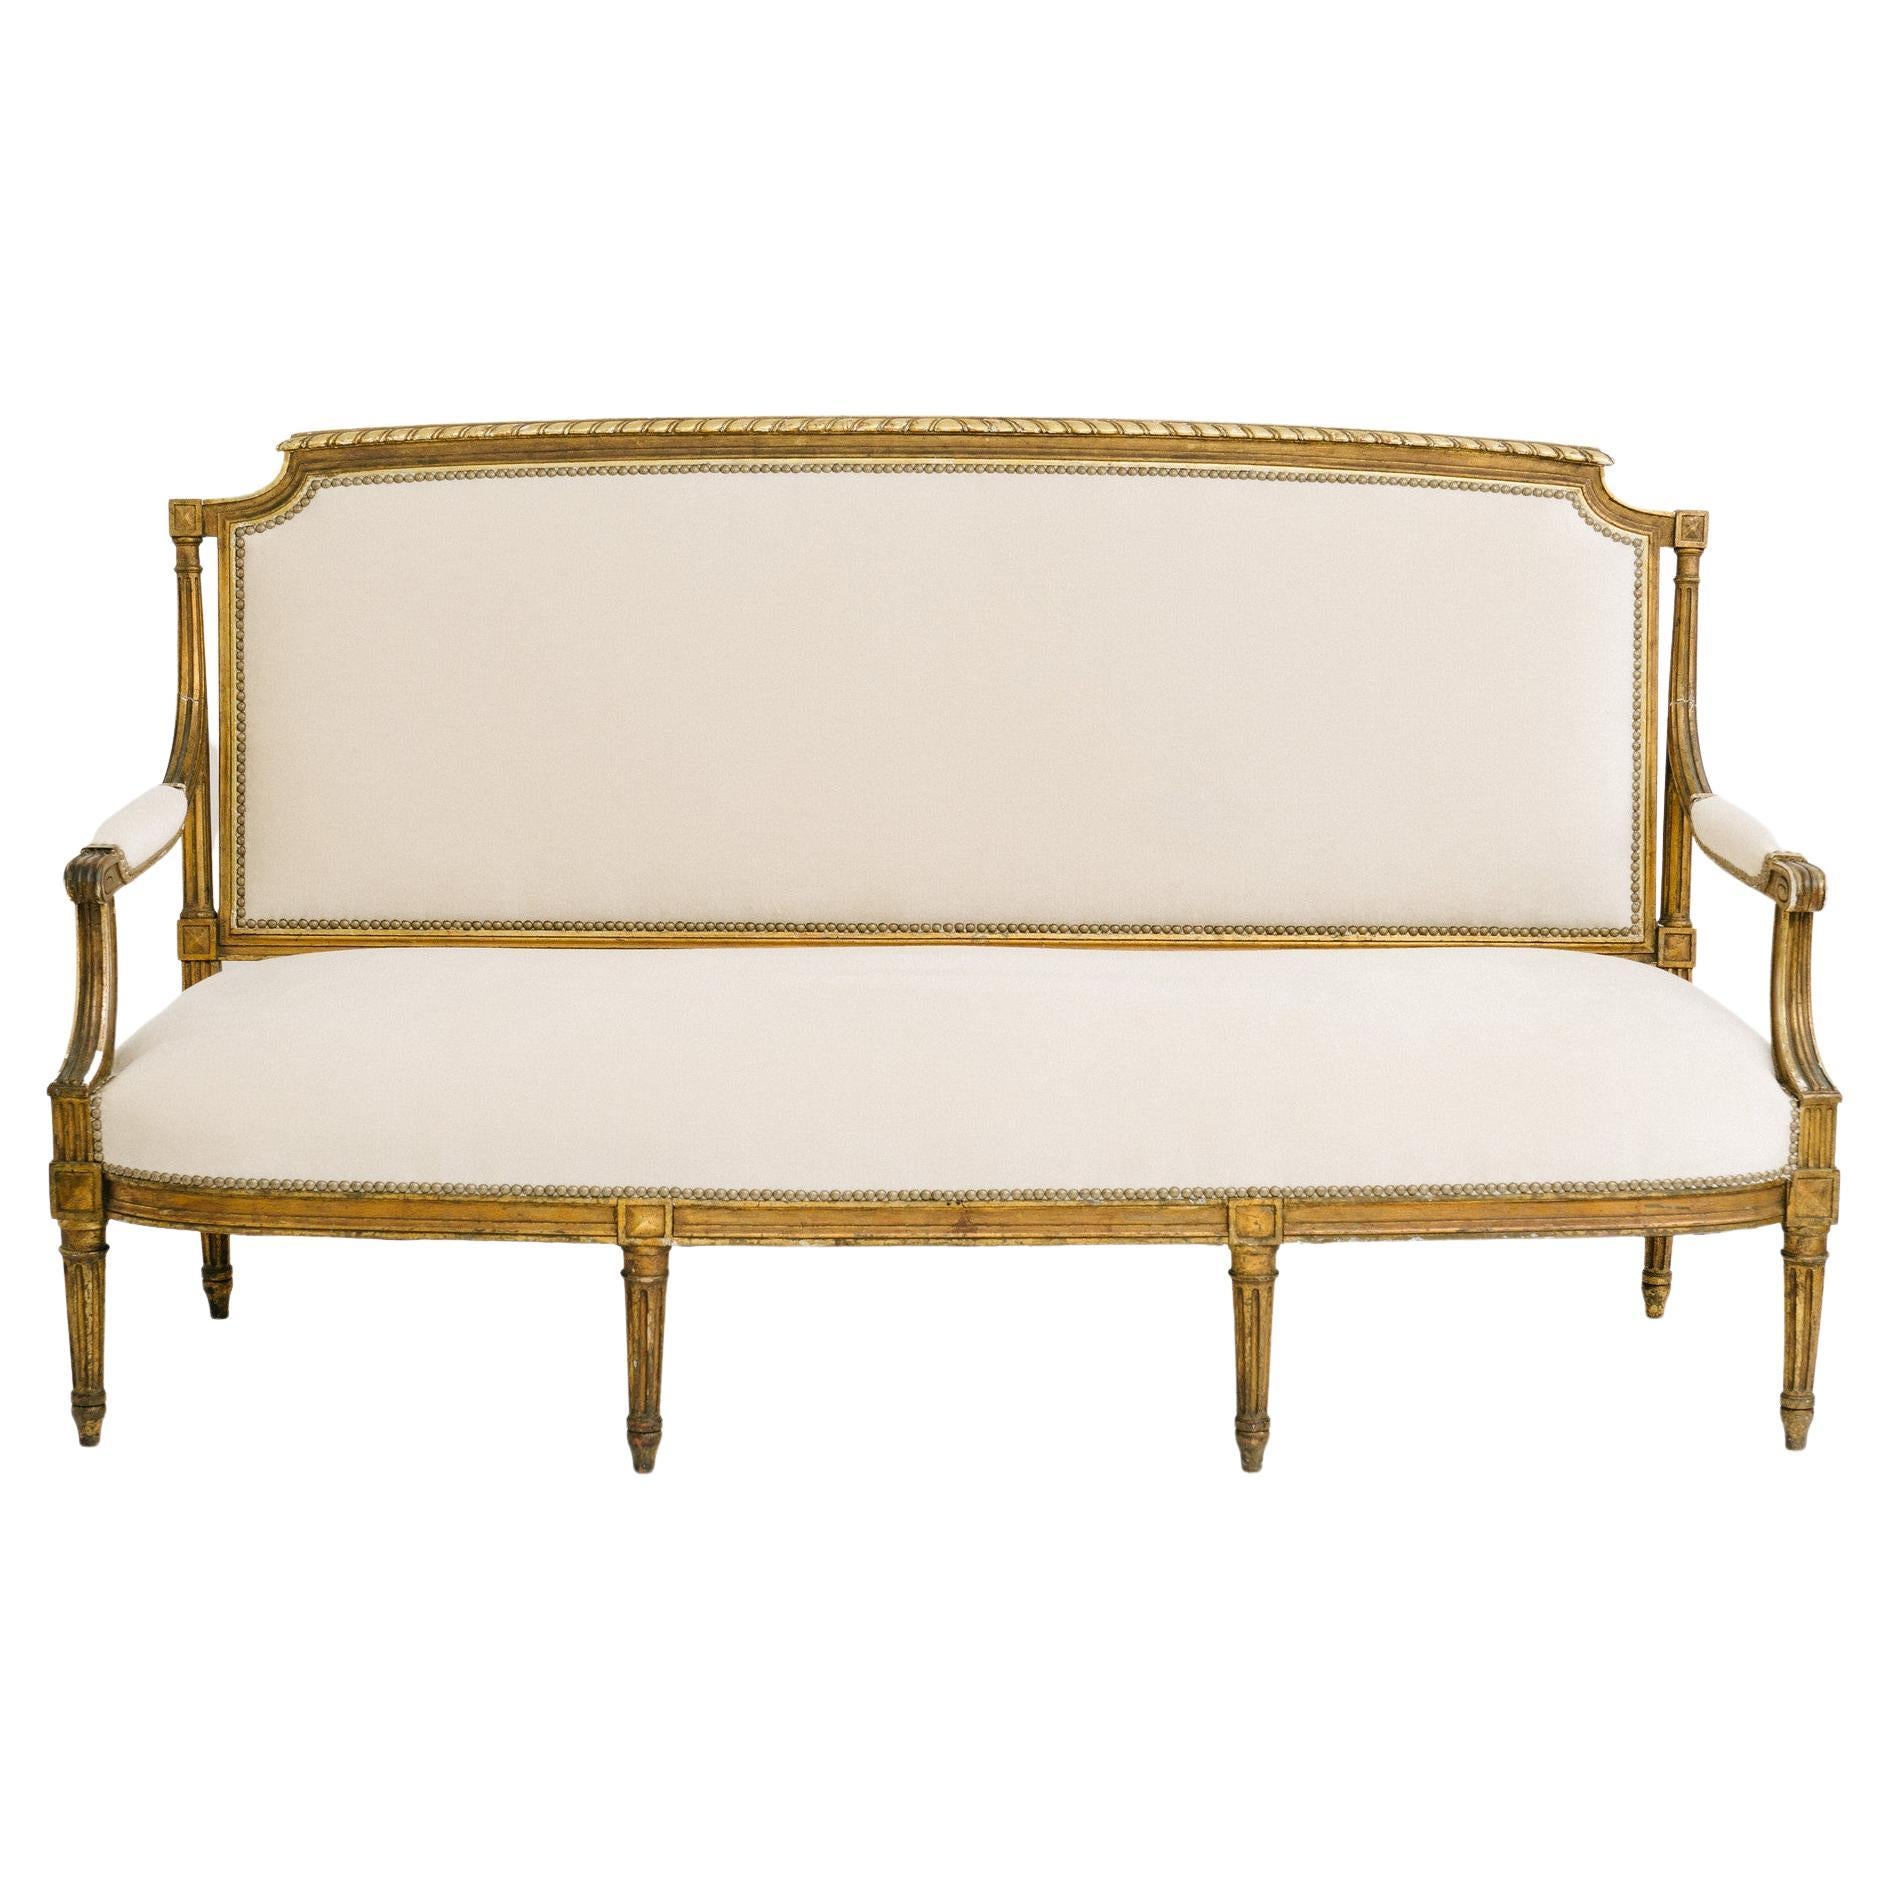 19th Century Louis XVI Giltwood Settee For Sale